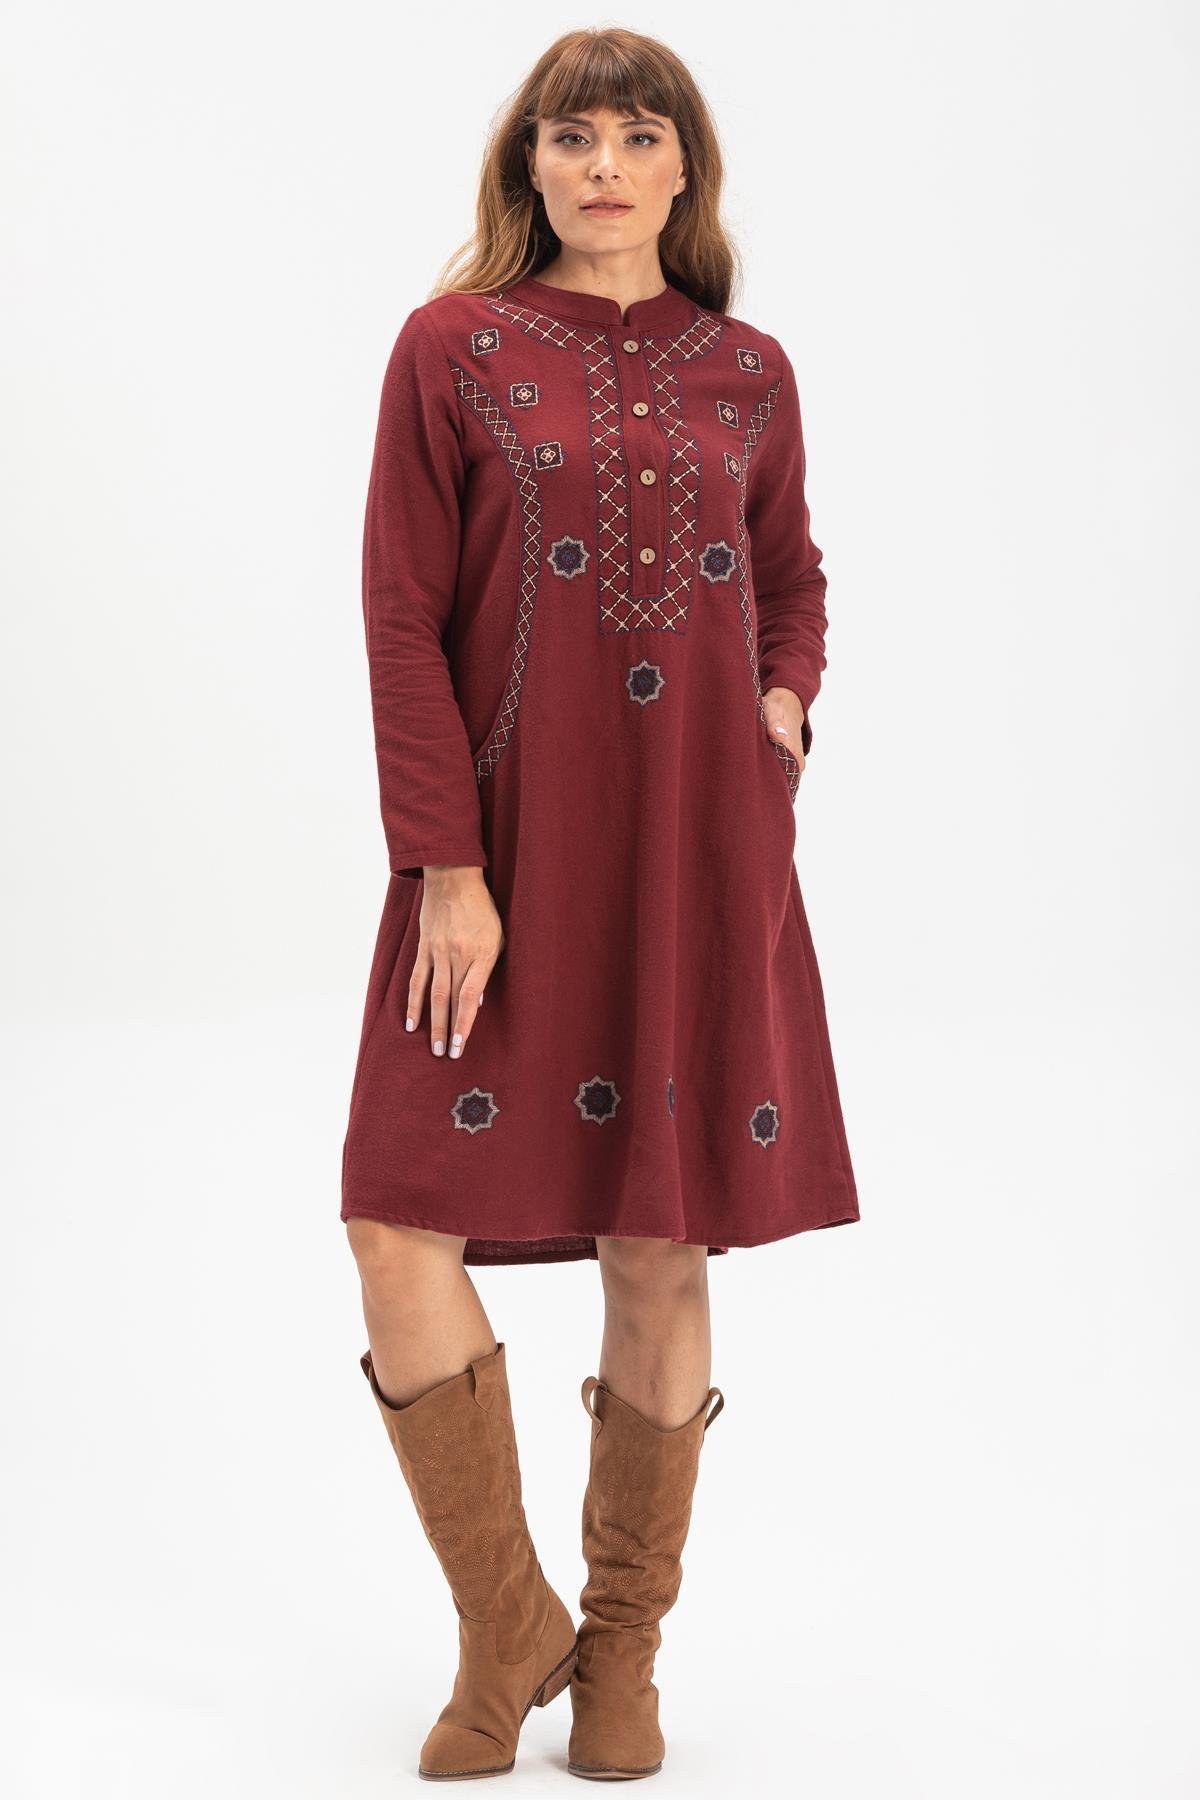 Red Embroidered Short Sleeve Tunic